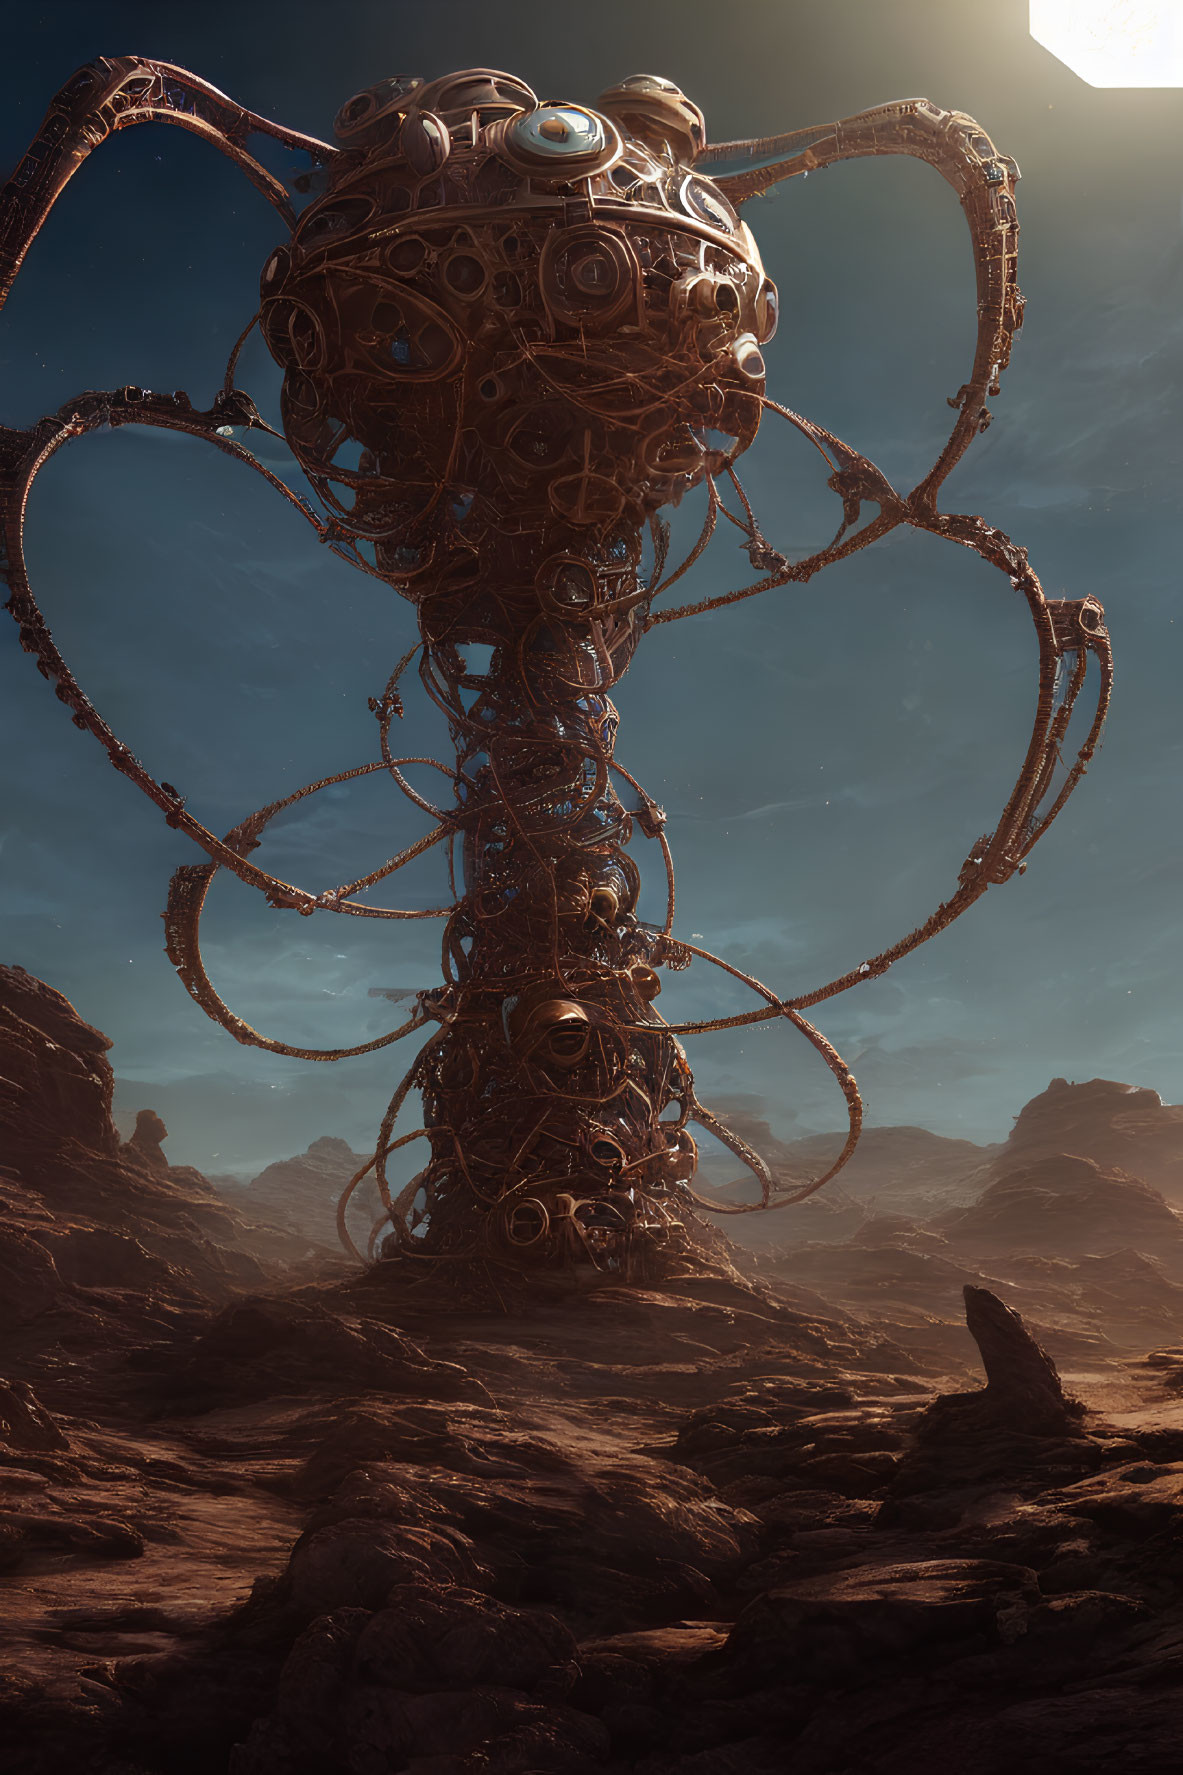 Intricate mechanical structure with tentacle-like appendages in rocky desert landscape